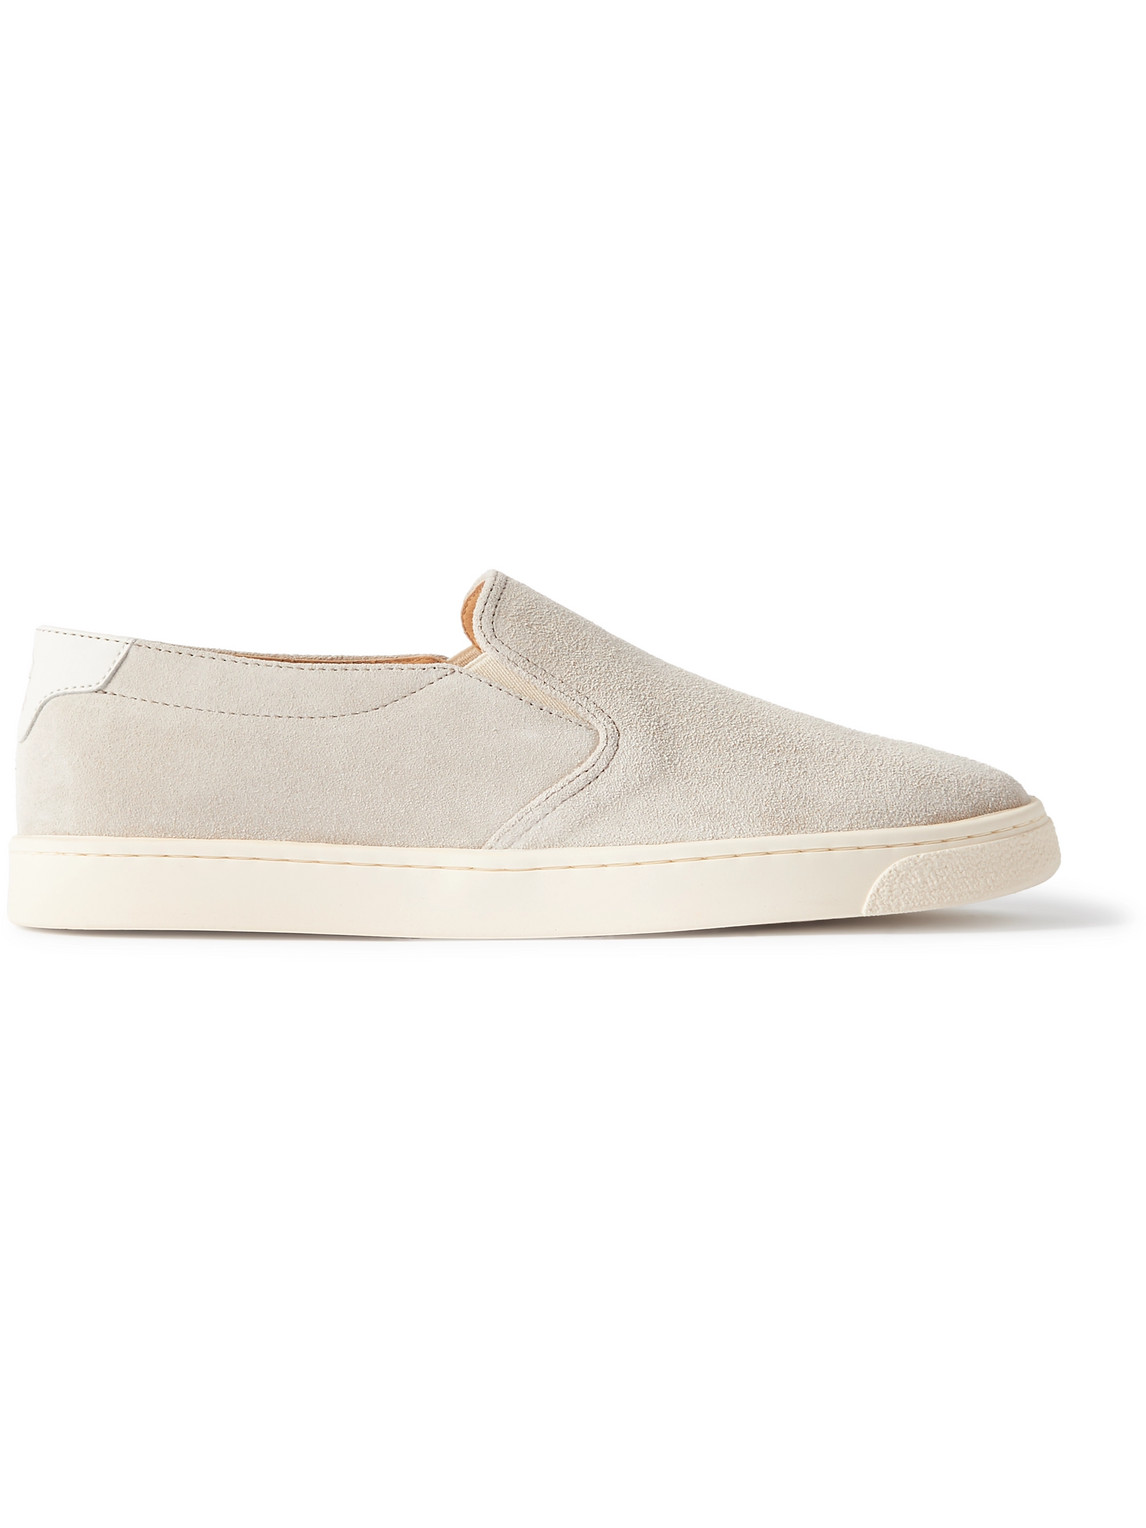 Brunello Cucinelli Leather-trimmed Suede Slip-on Trainers In Neutral